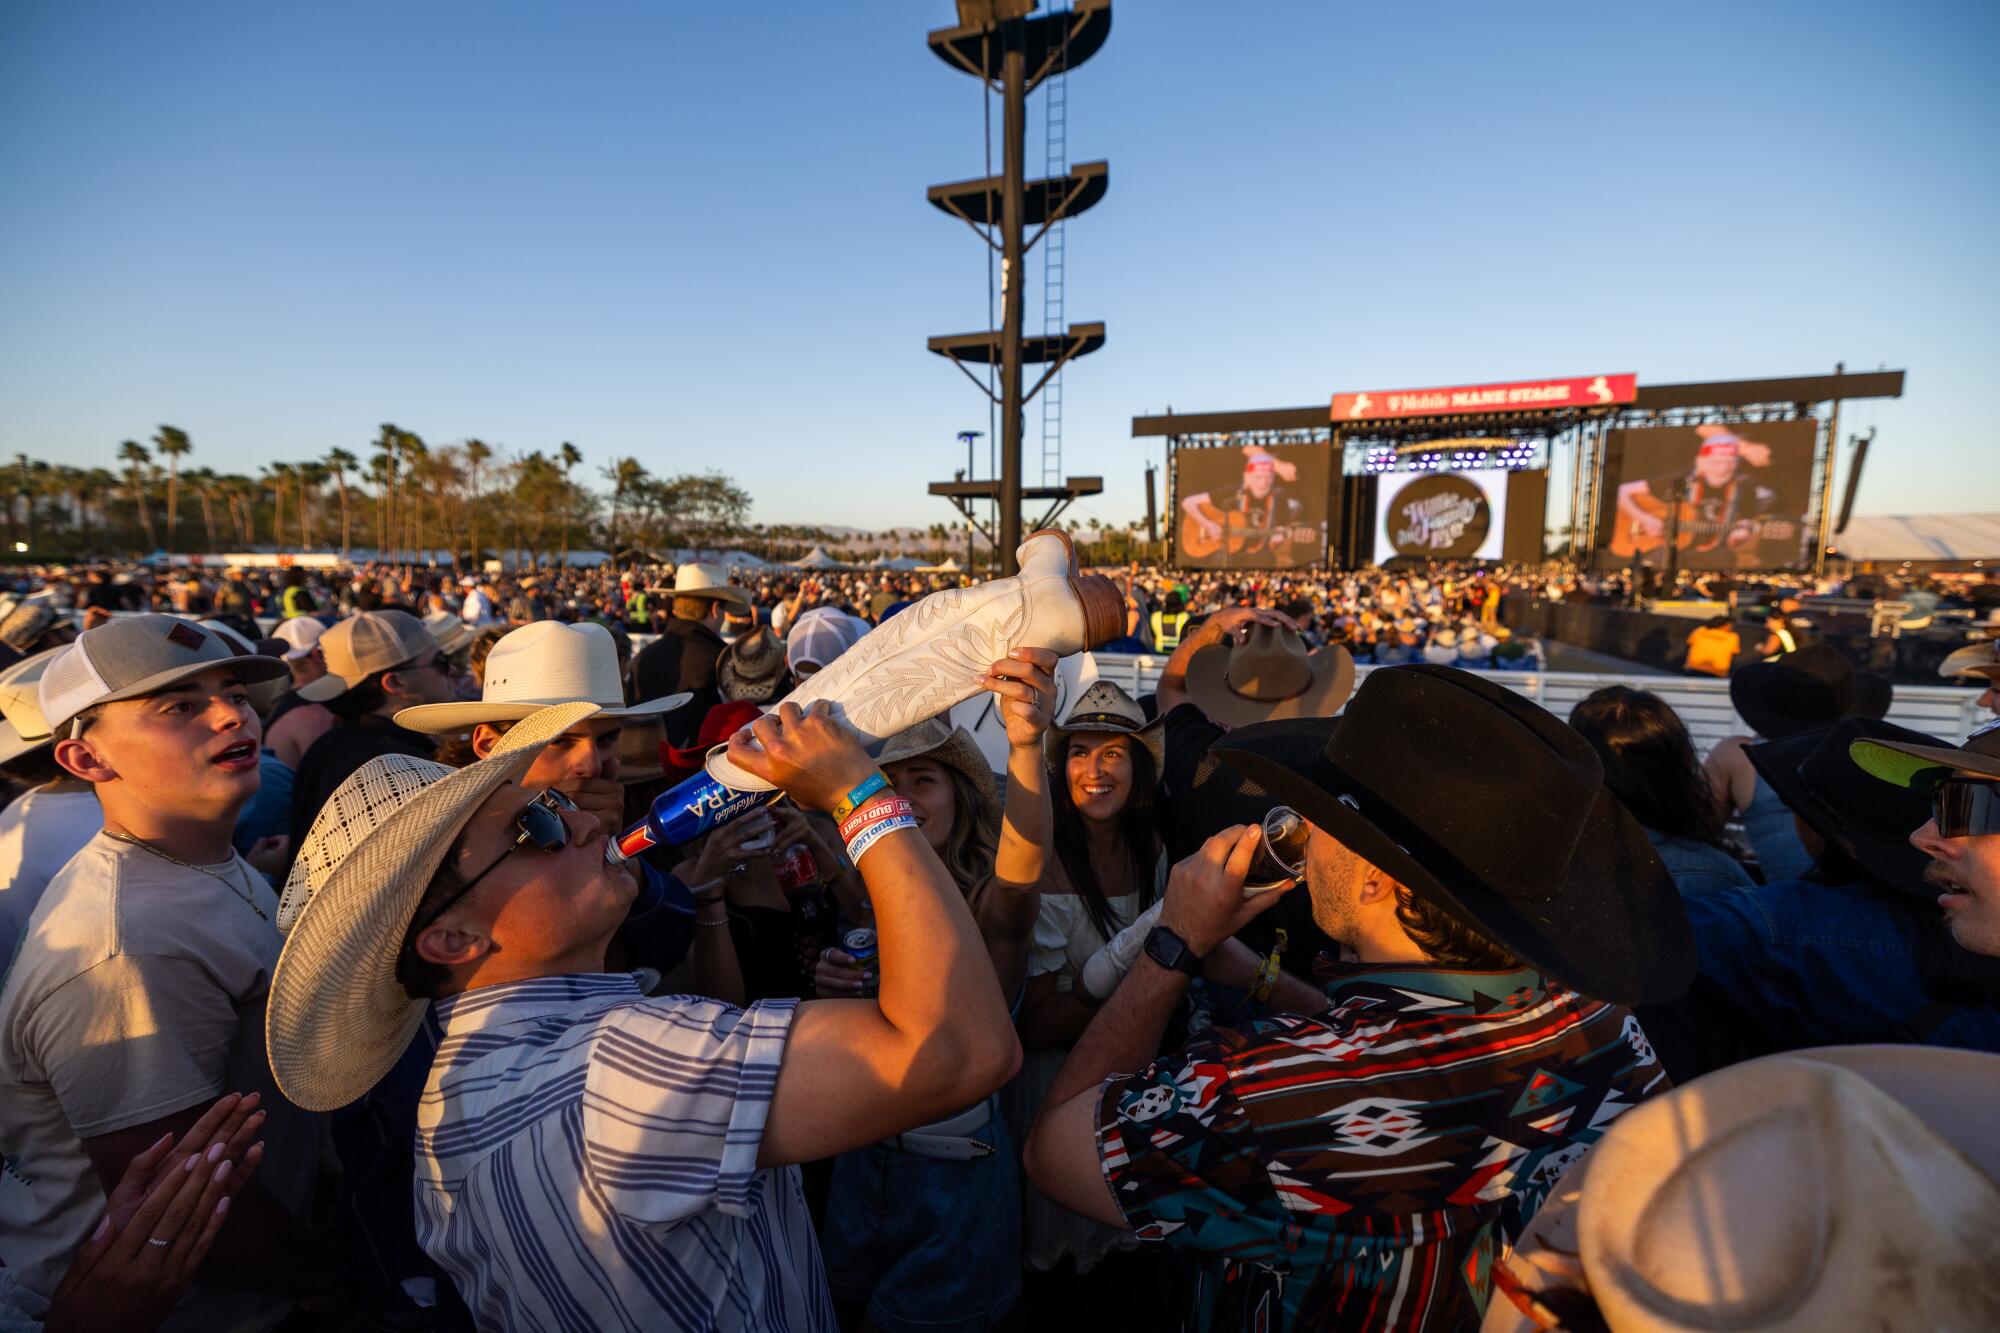 A man drinks a beer from a woman's boot while watching Willie Nelson & Family perform.